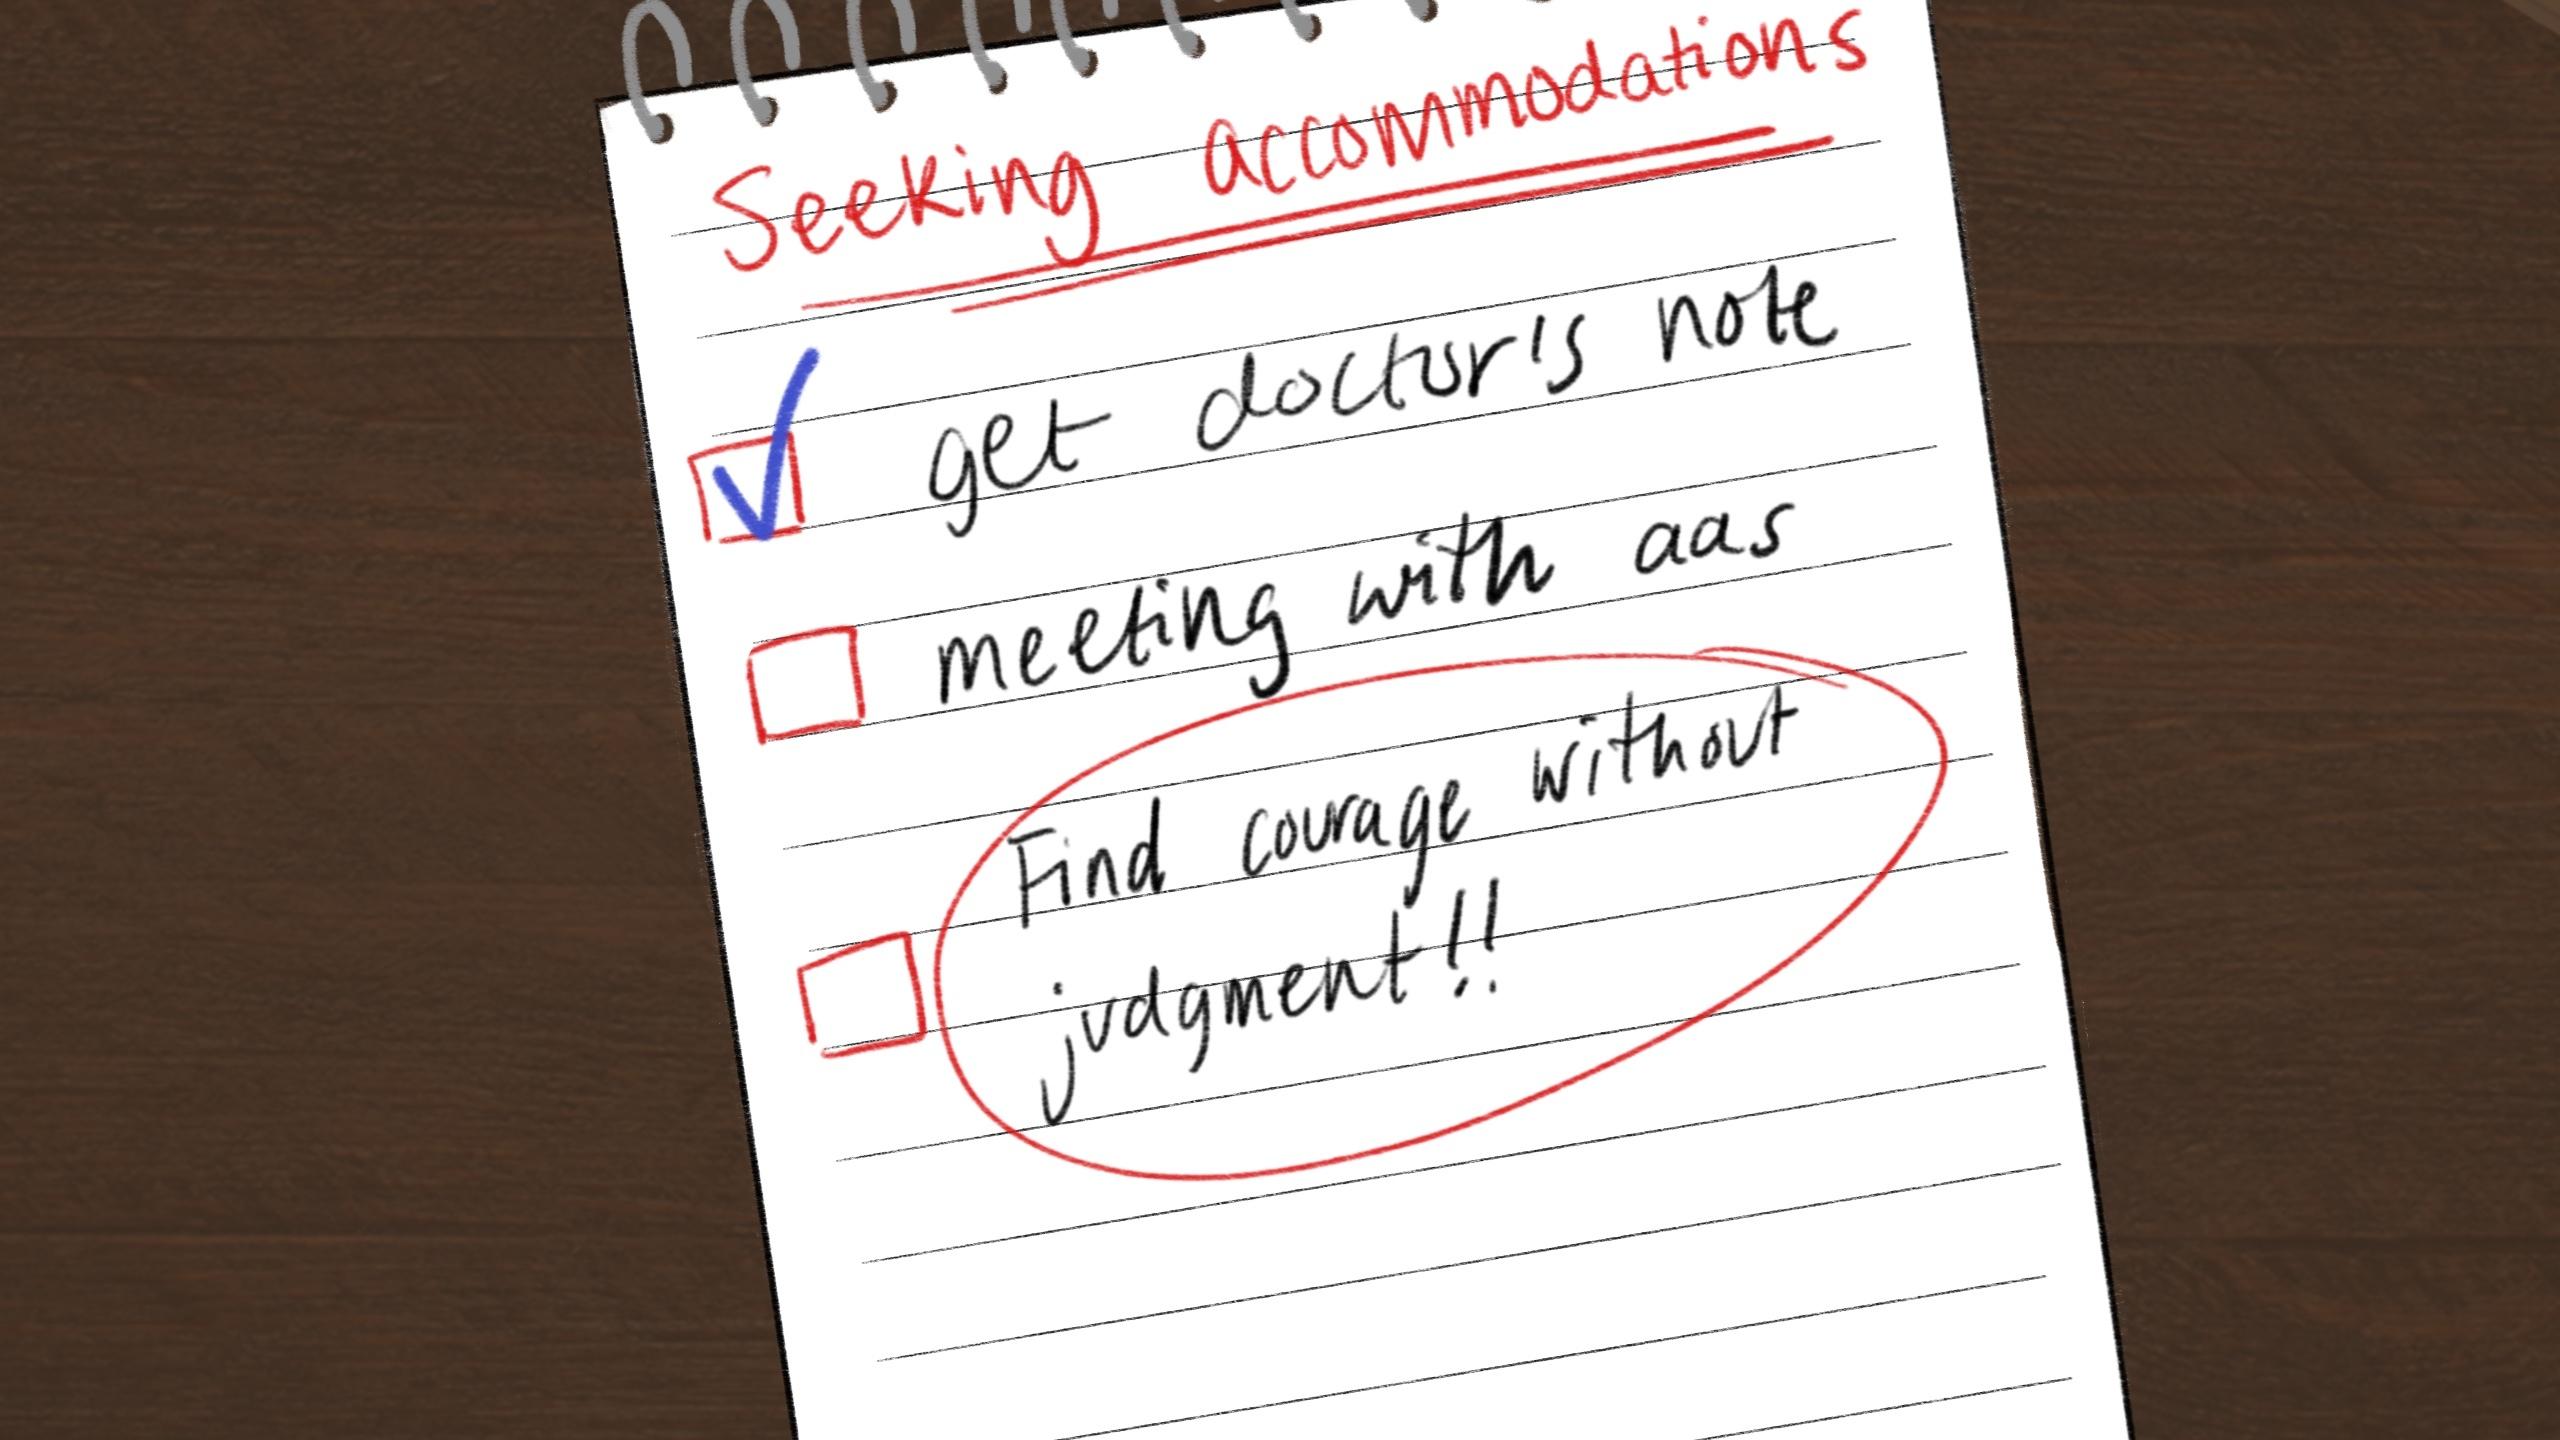 Check list on a note pad with three tasks: get doctor's note which is checked, meeting with aas and a red circle around find courage without judgment!